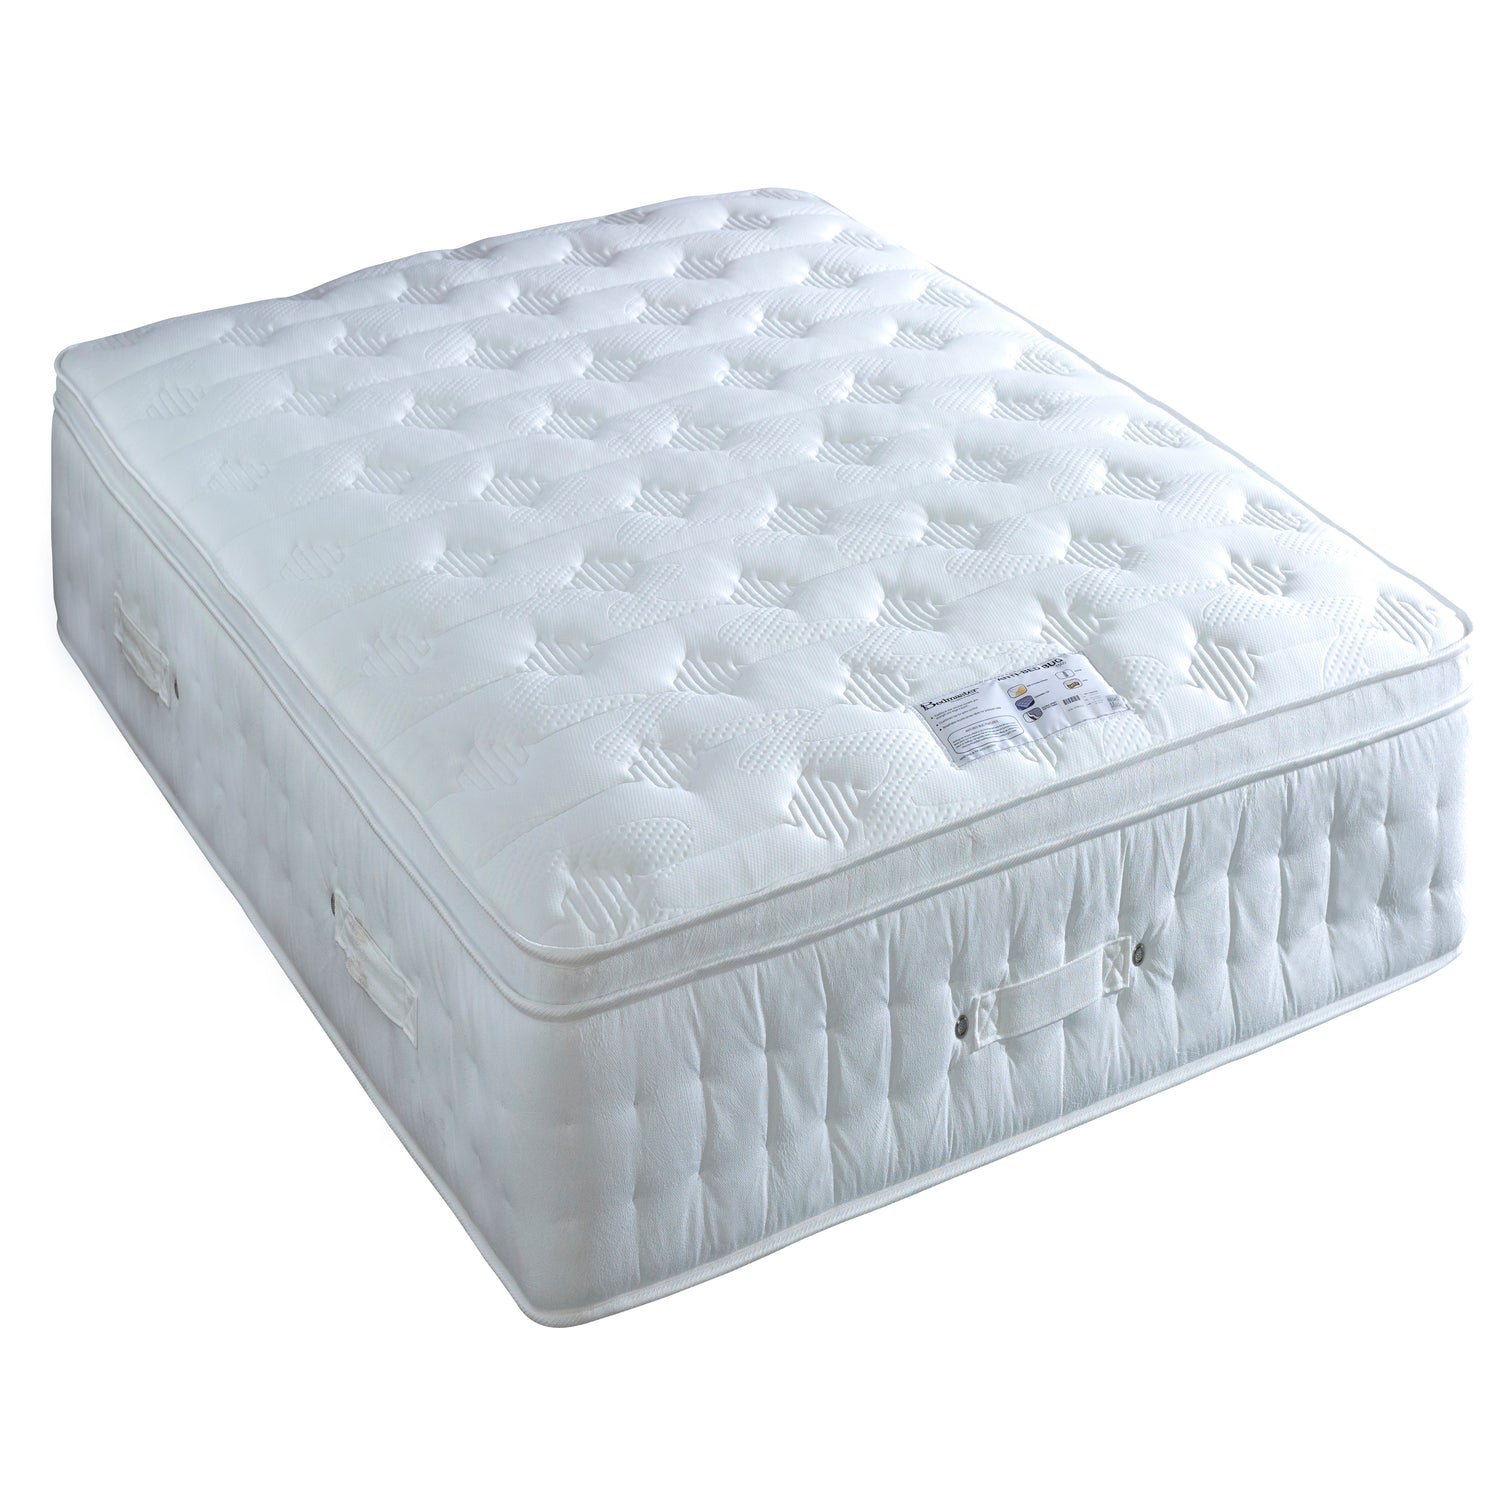 Bedmaster Anti Bed Bug Mattress Double-Better Bed Company 